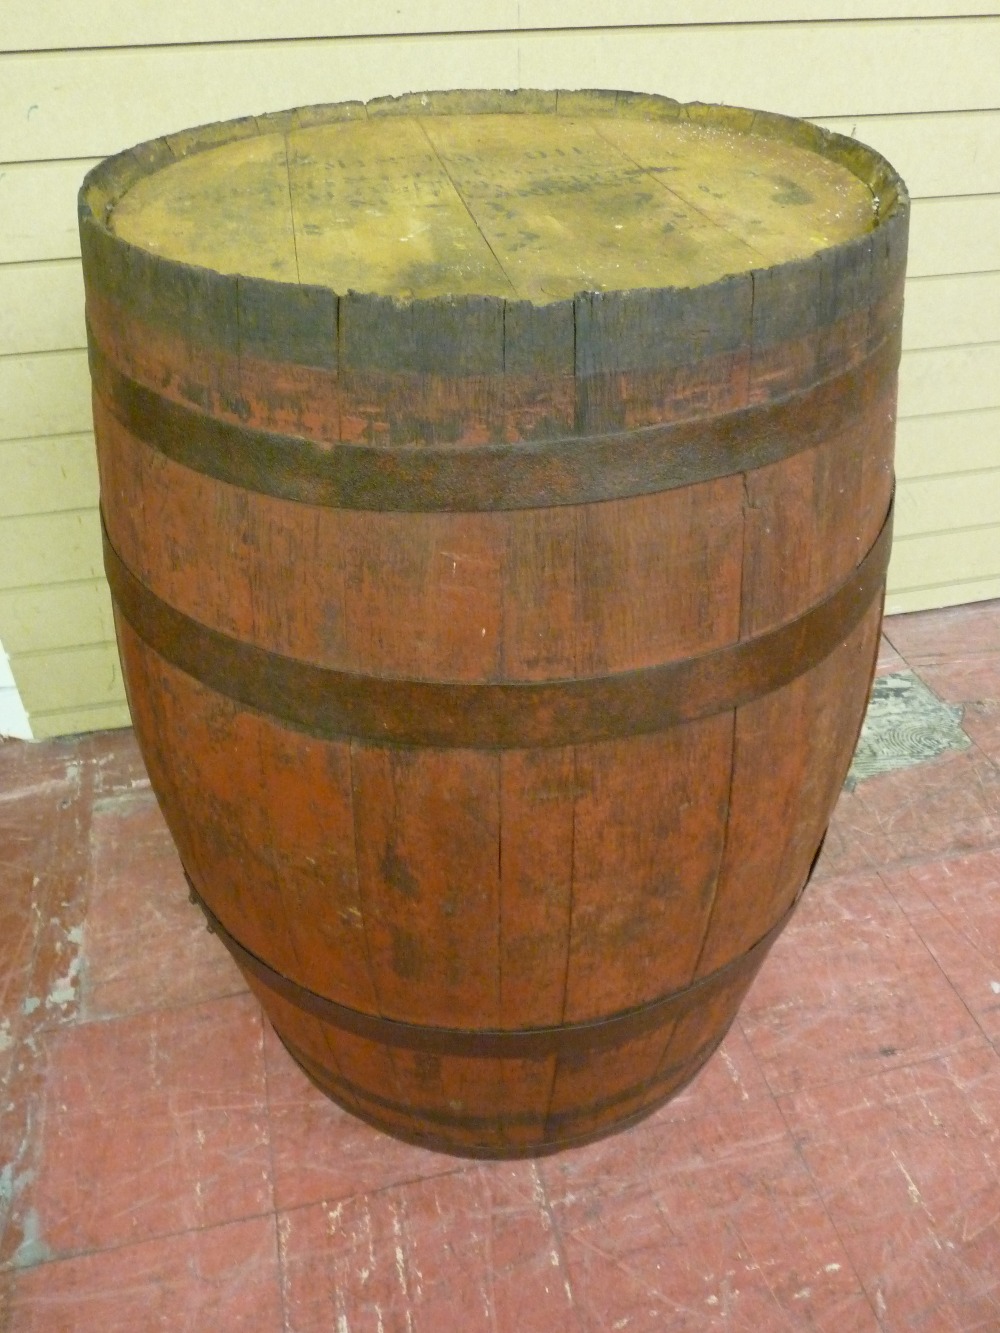 A COMPLETE METAL BANDED OIL BARREL, 86 cms high, diameter at top 55 cms